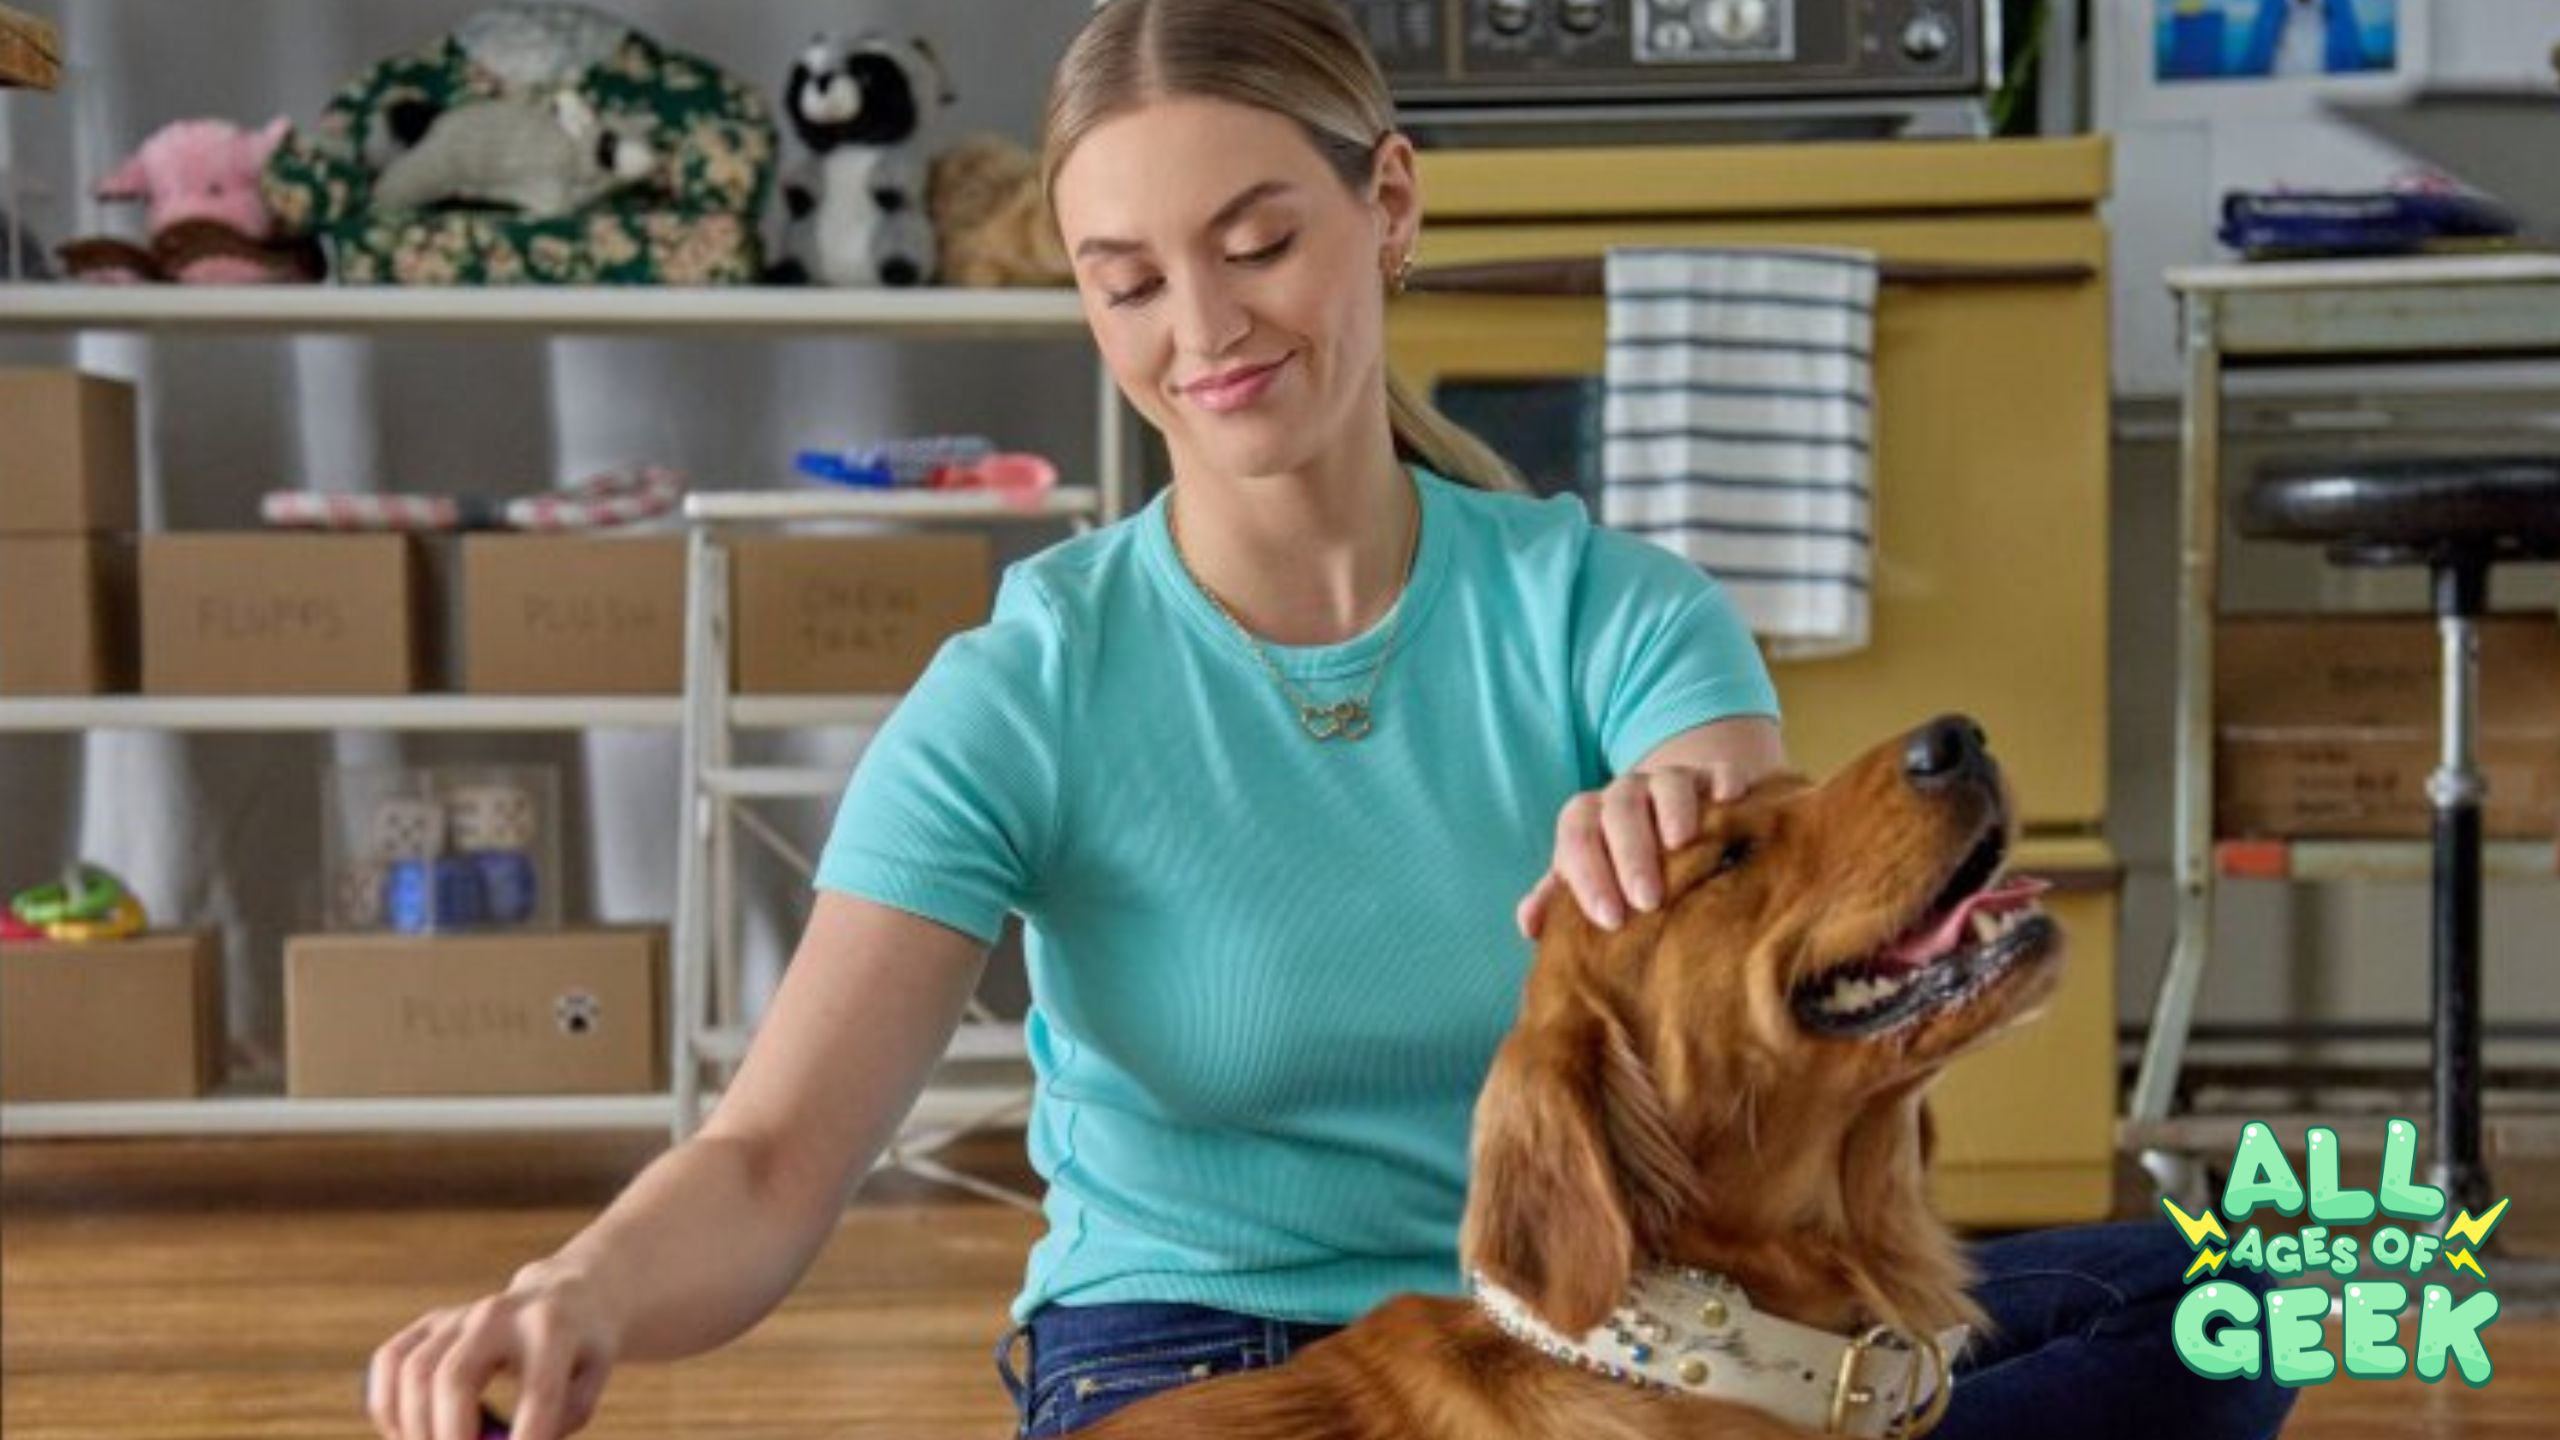 “Everything Puppies” A Heartwarming Tail on the Hallmark Channel